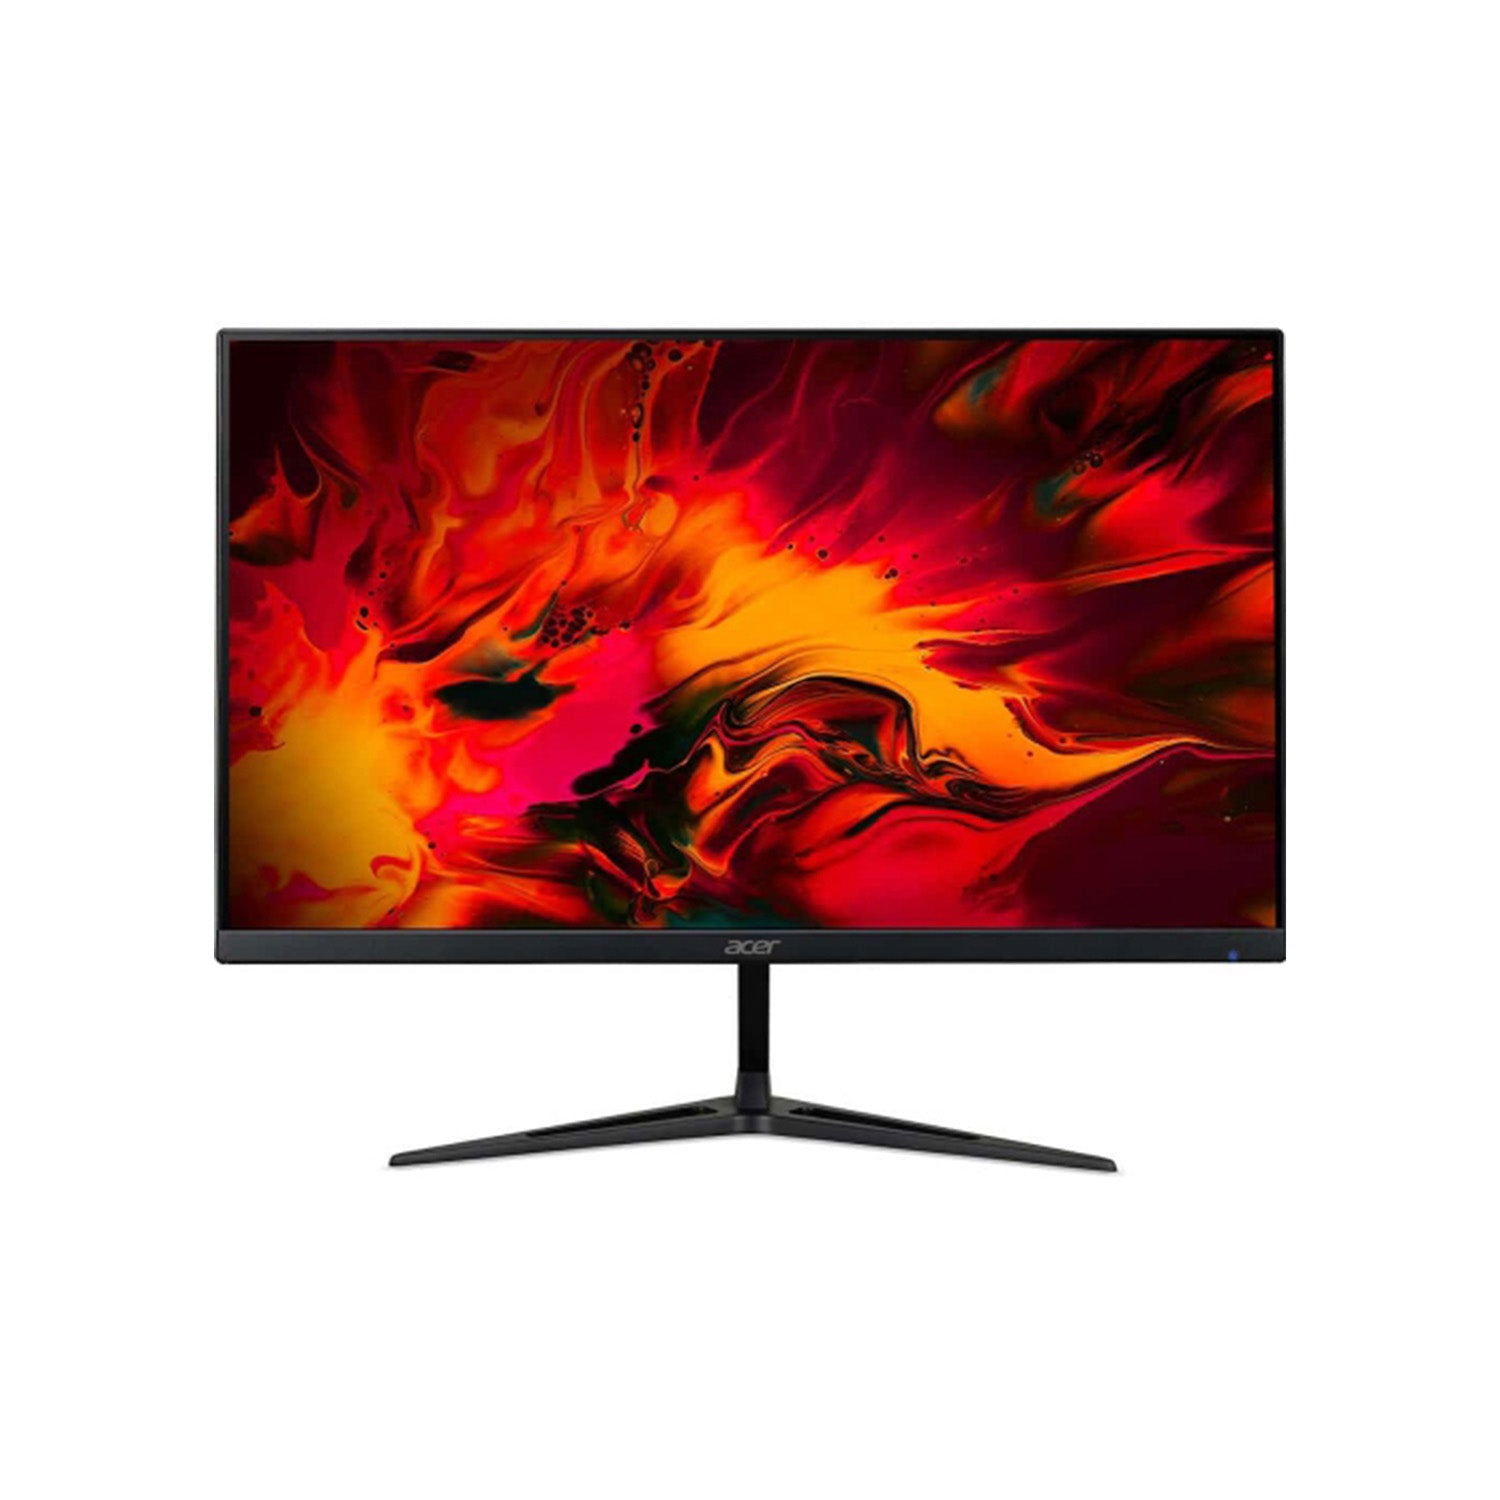 Acer 27" Inch FHD Widescreen Gaming Monitor -144Hz 1ms VRB FreeSync HDR10 -HDMI, DP - Brand New